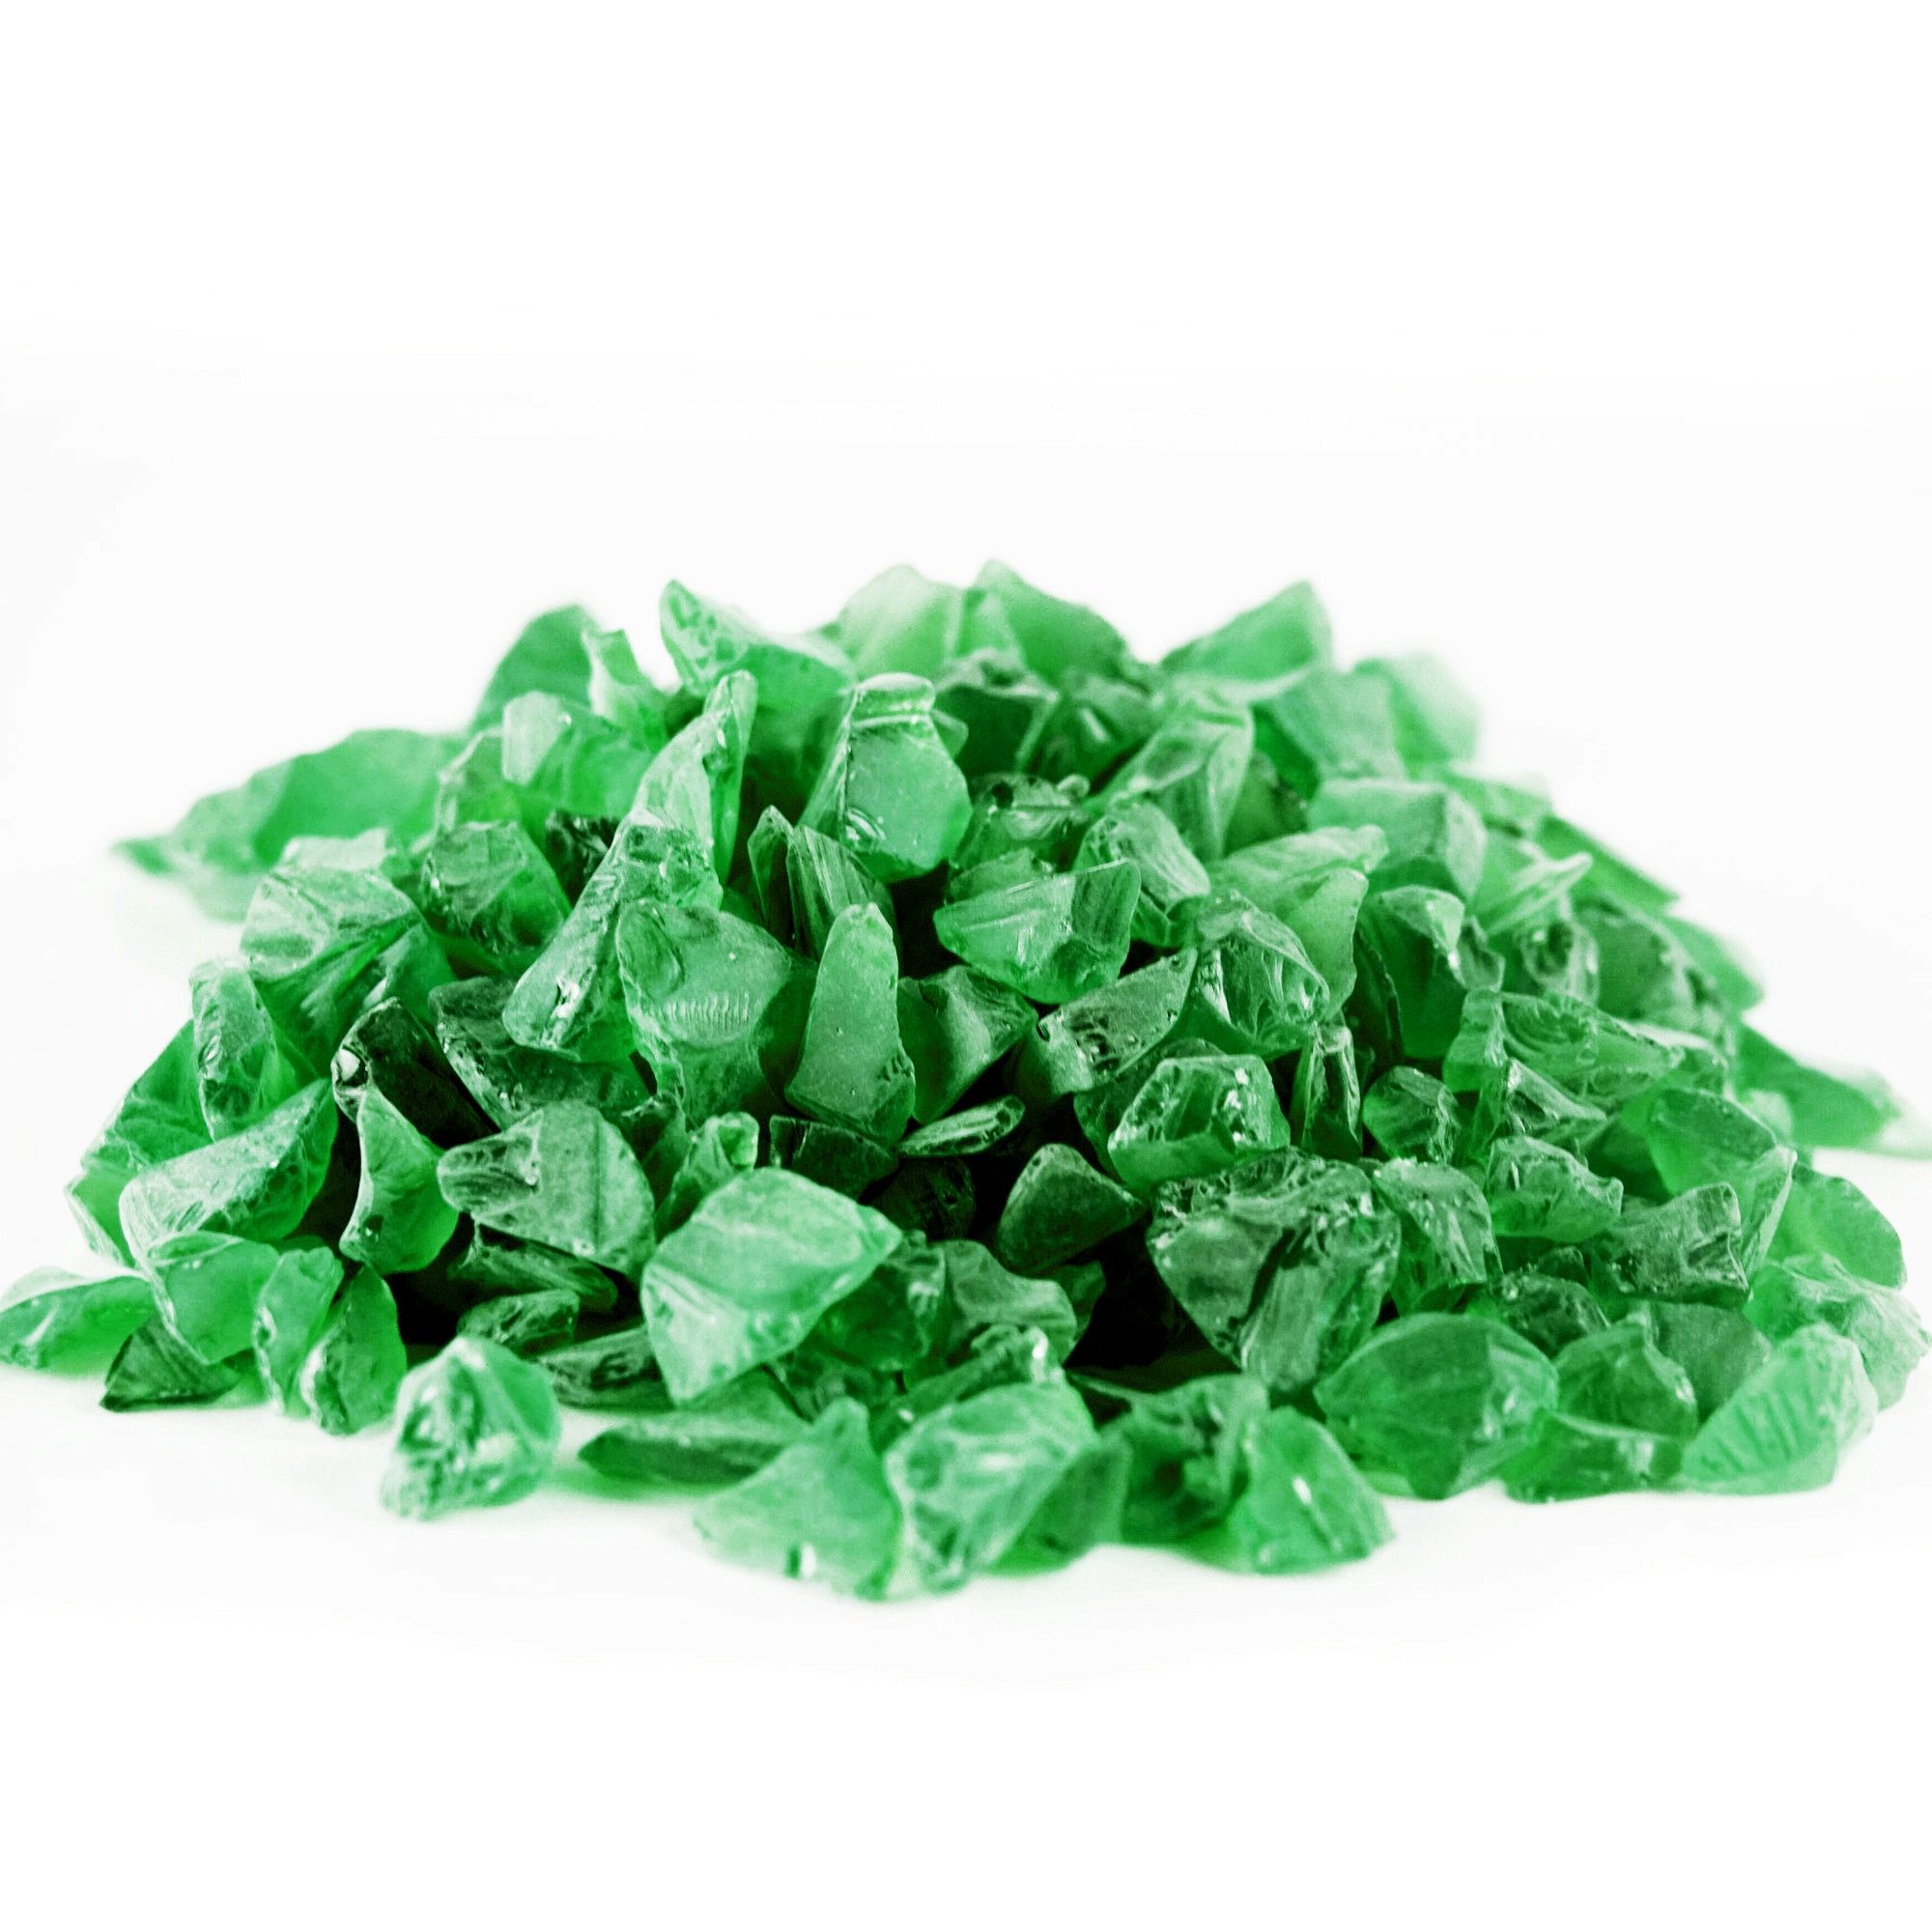 Wholesale Bulk Colored Decorative Crushed Sea Glass for Crafts